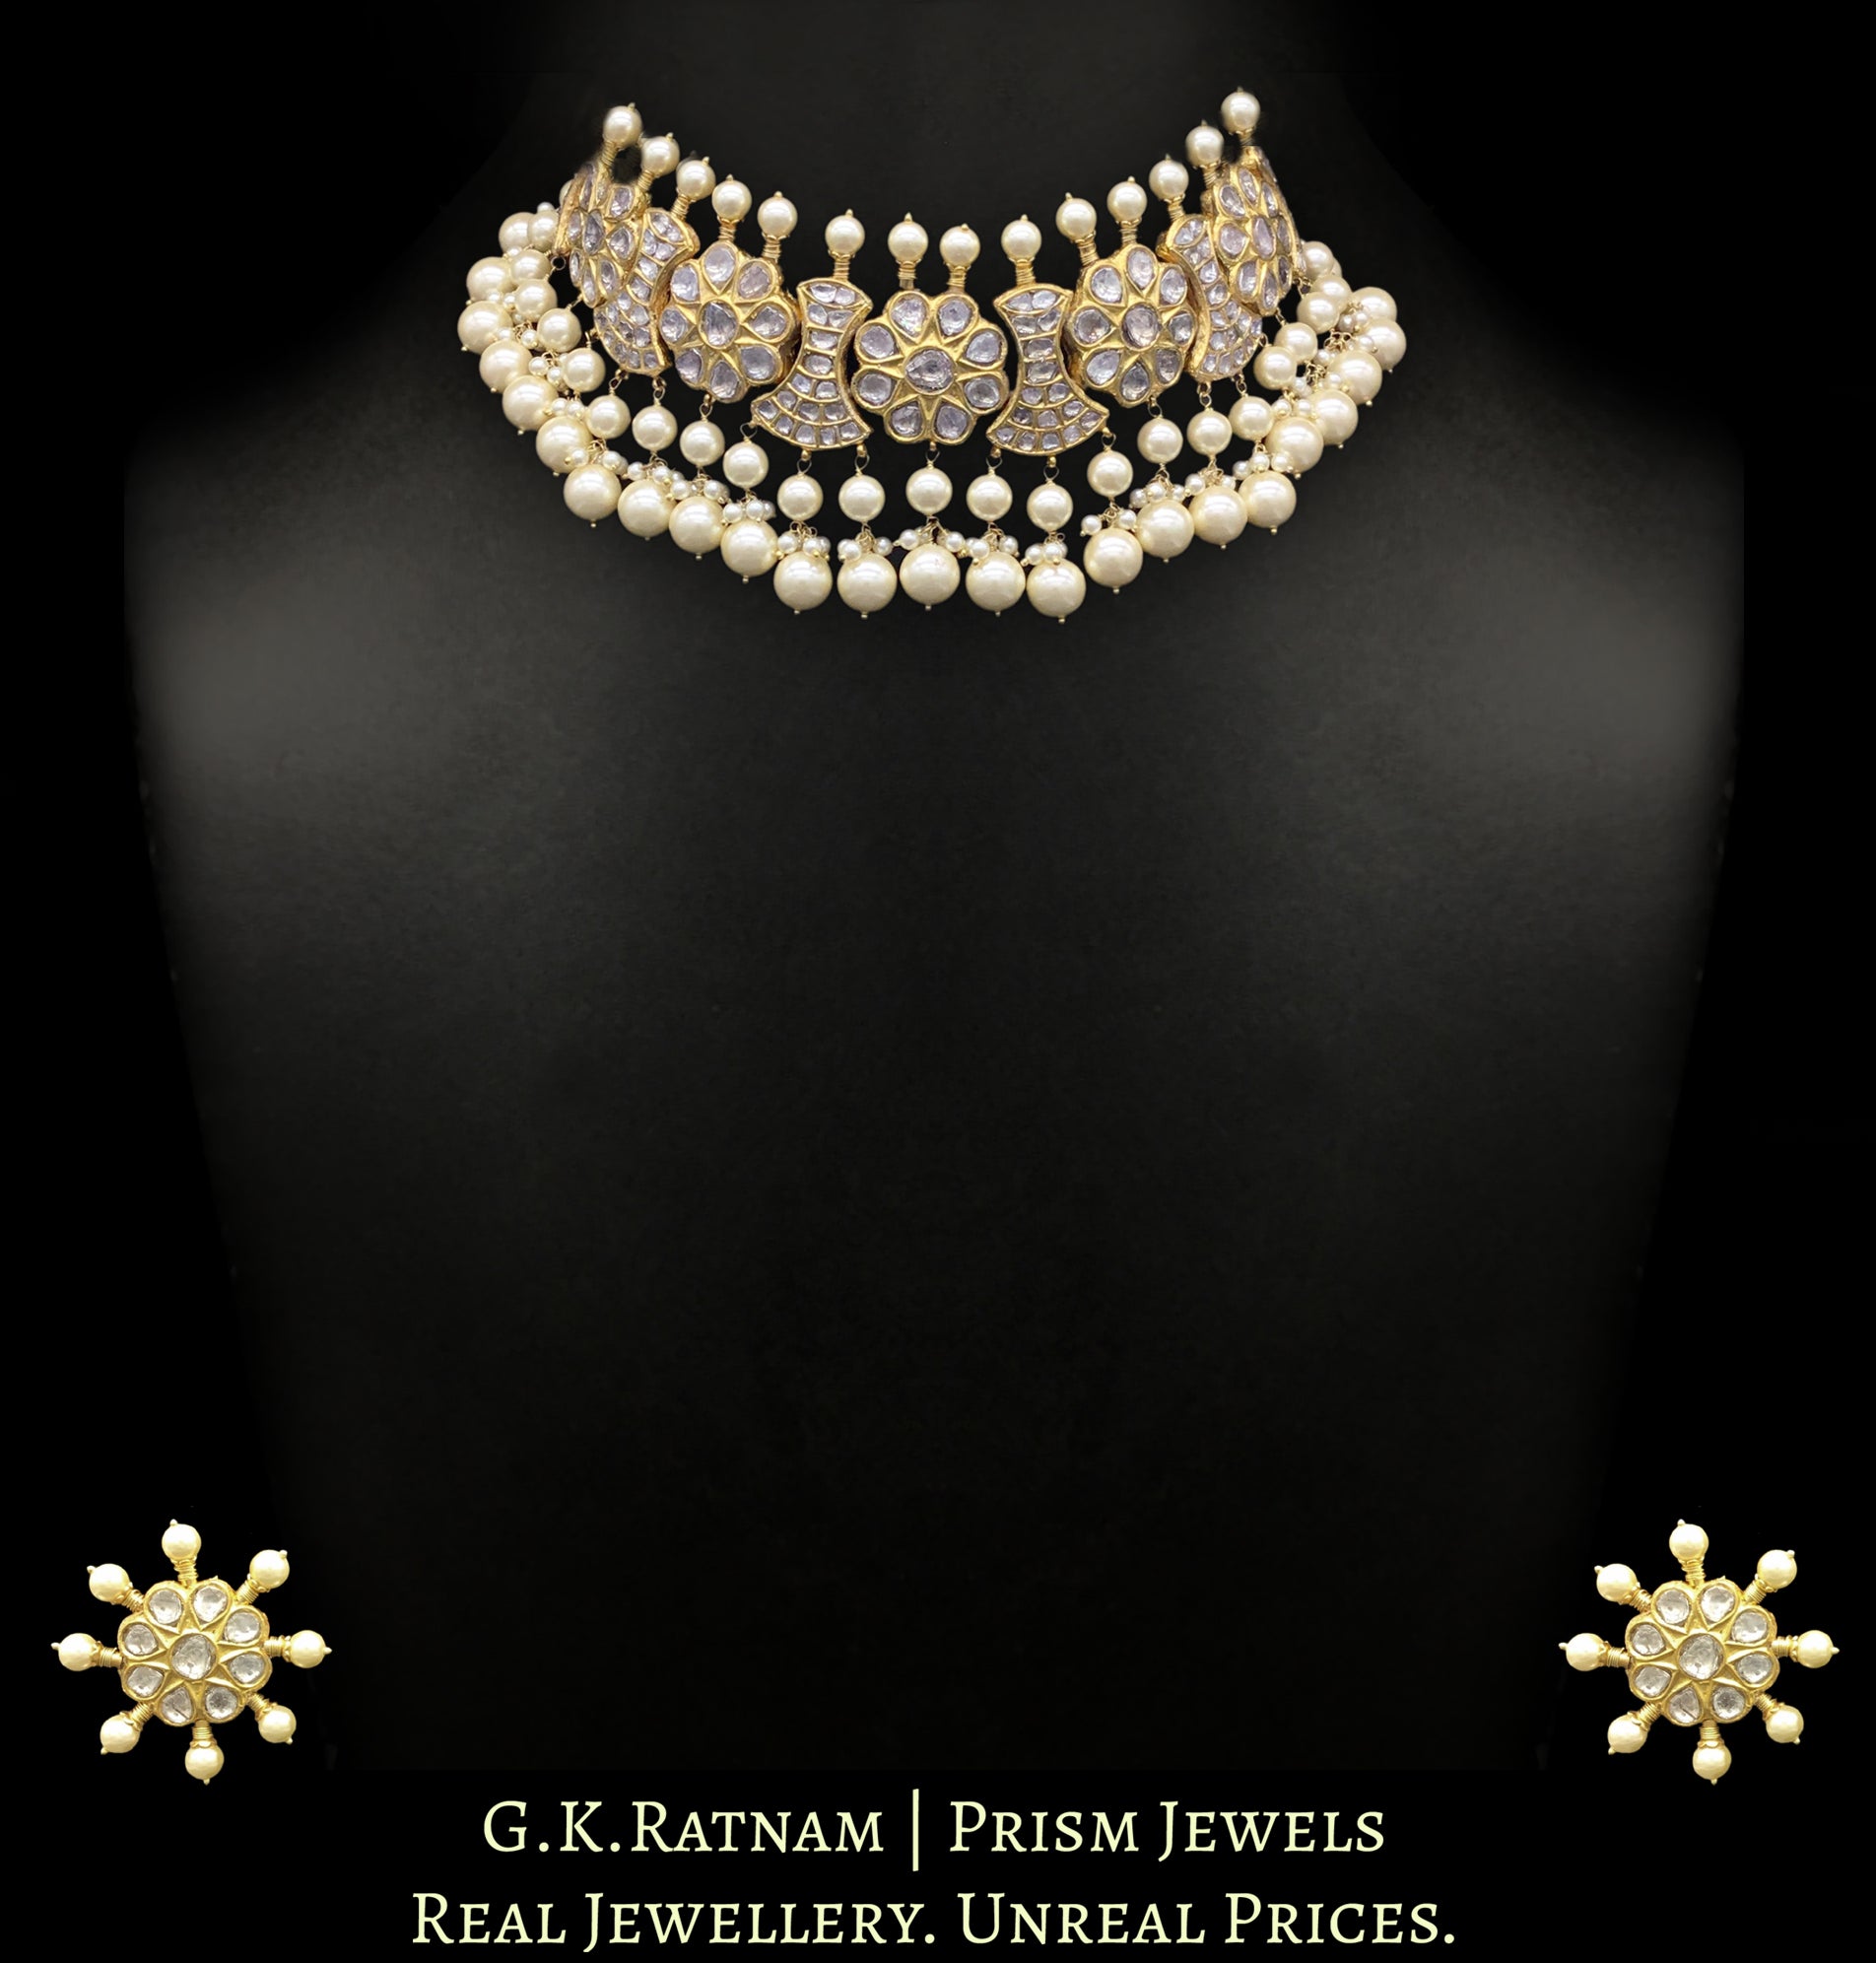 23k Gold and Diamond Polki Choker Necklace Set strung with multiple layers of lustrous pearls